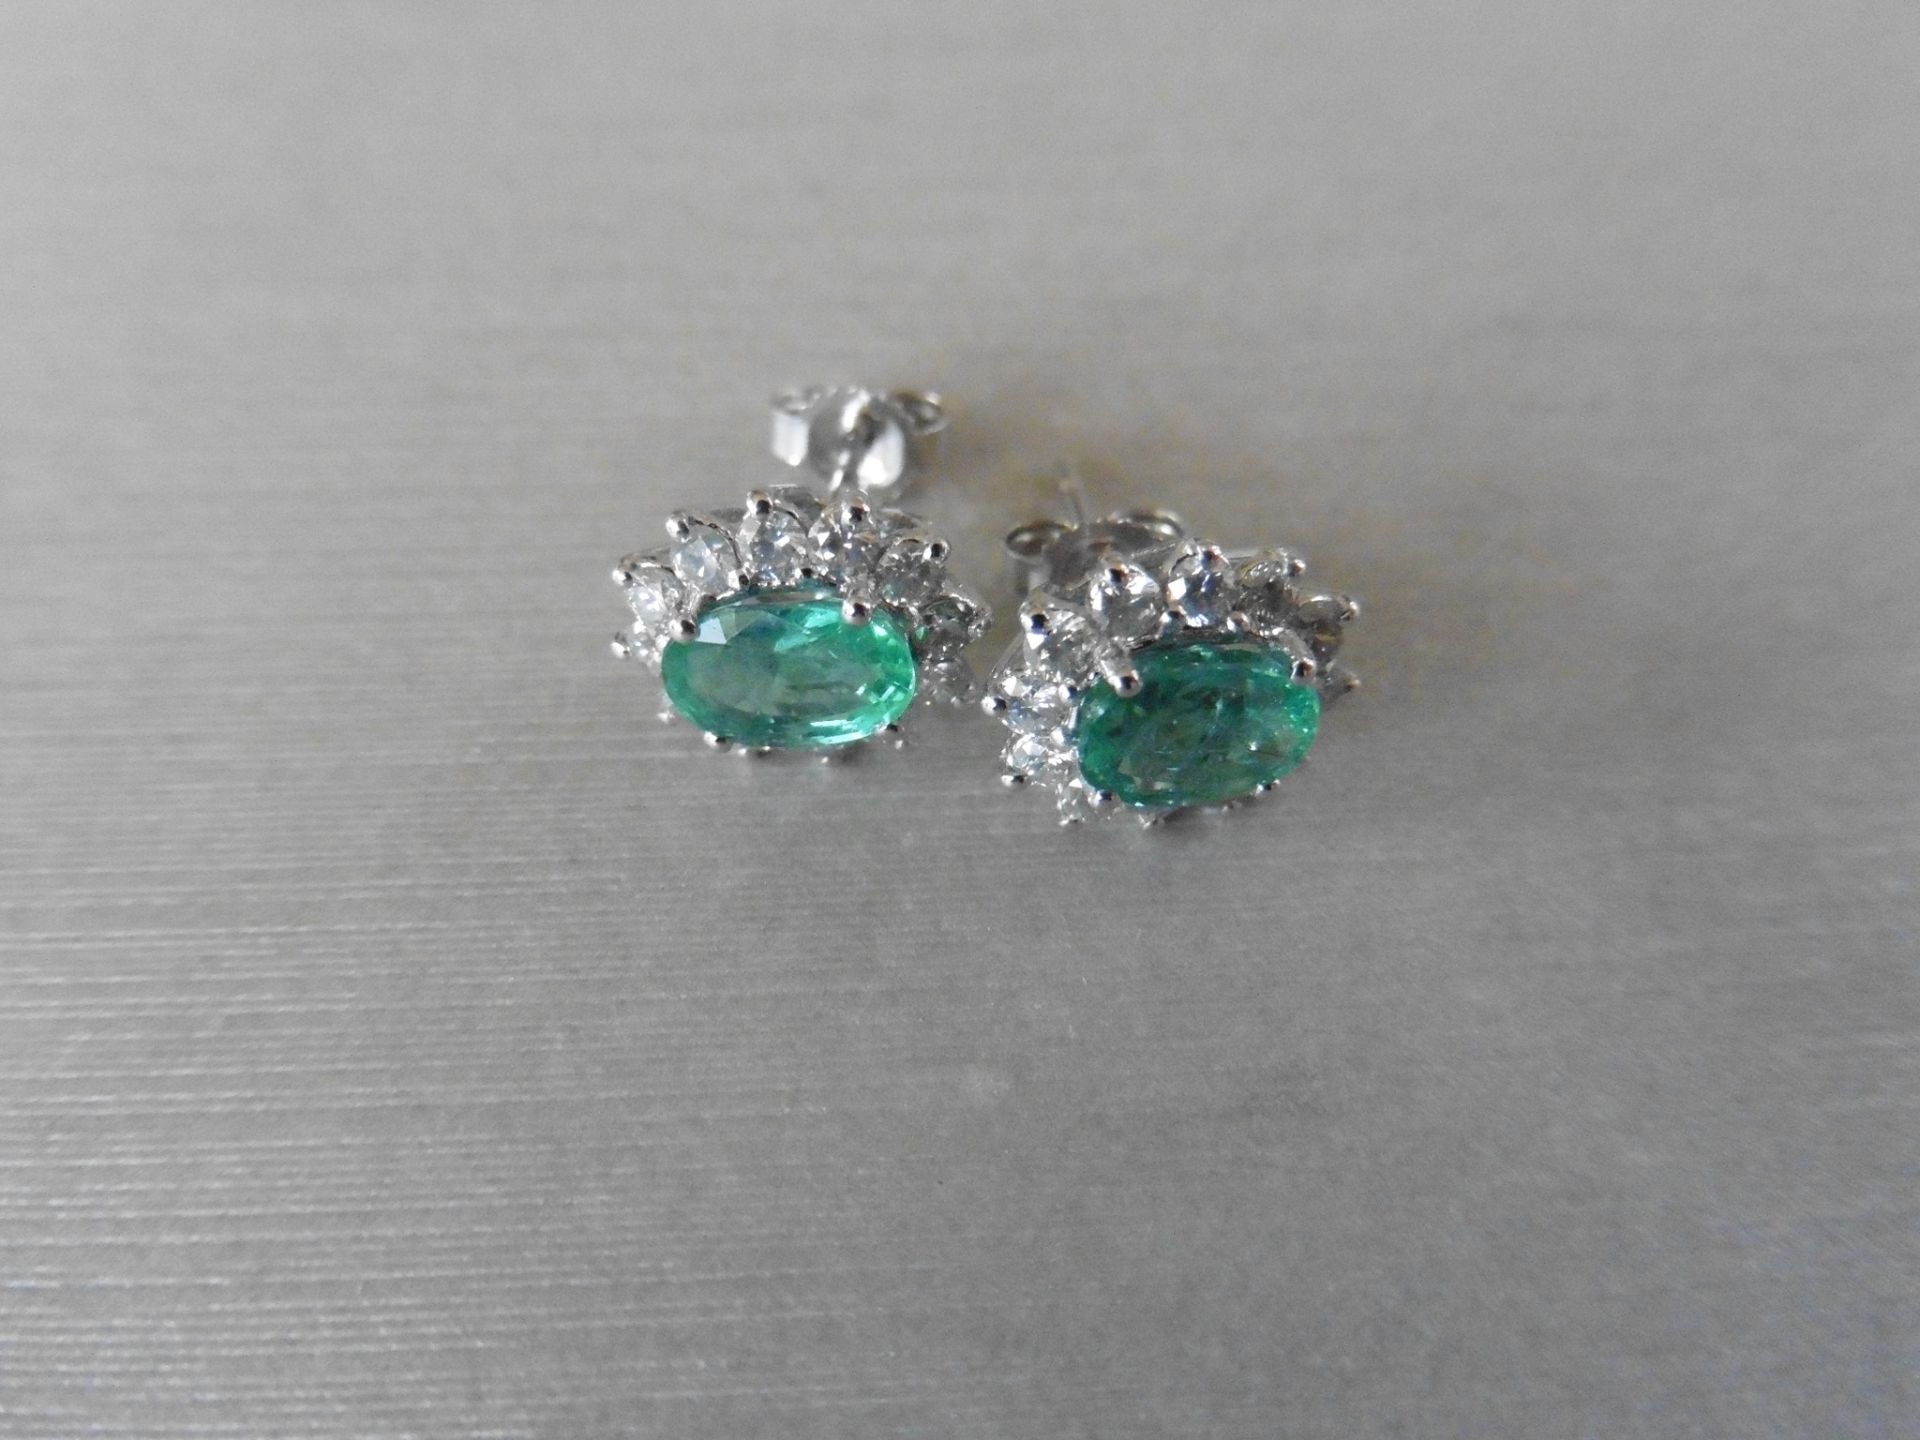 1.60ct emerald and Diamond cluster style stud earrings. Each emerald measures 7mm x 5mm and is - Image 2 of 4